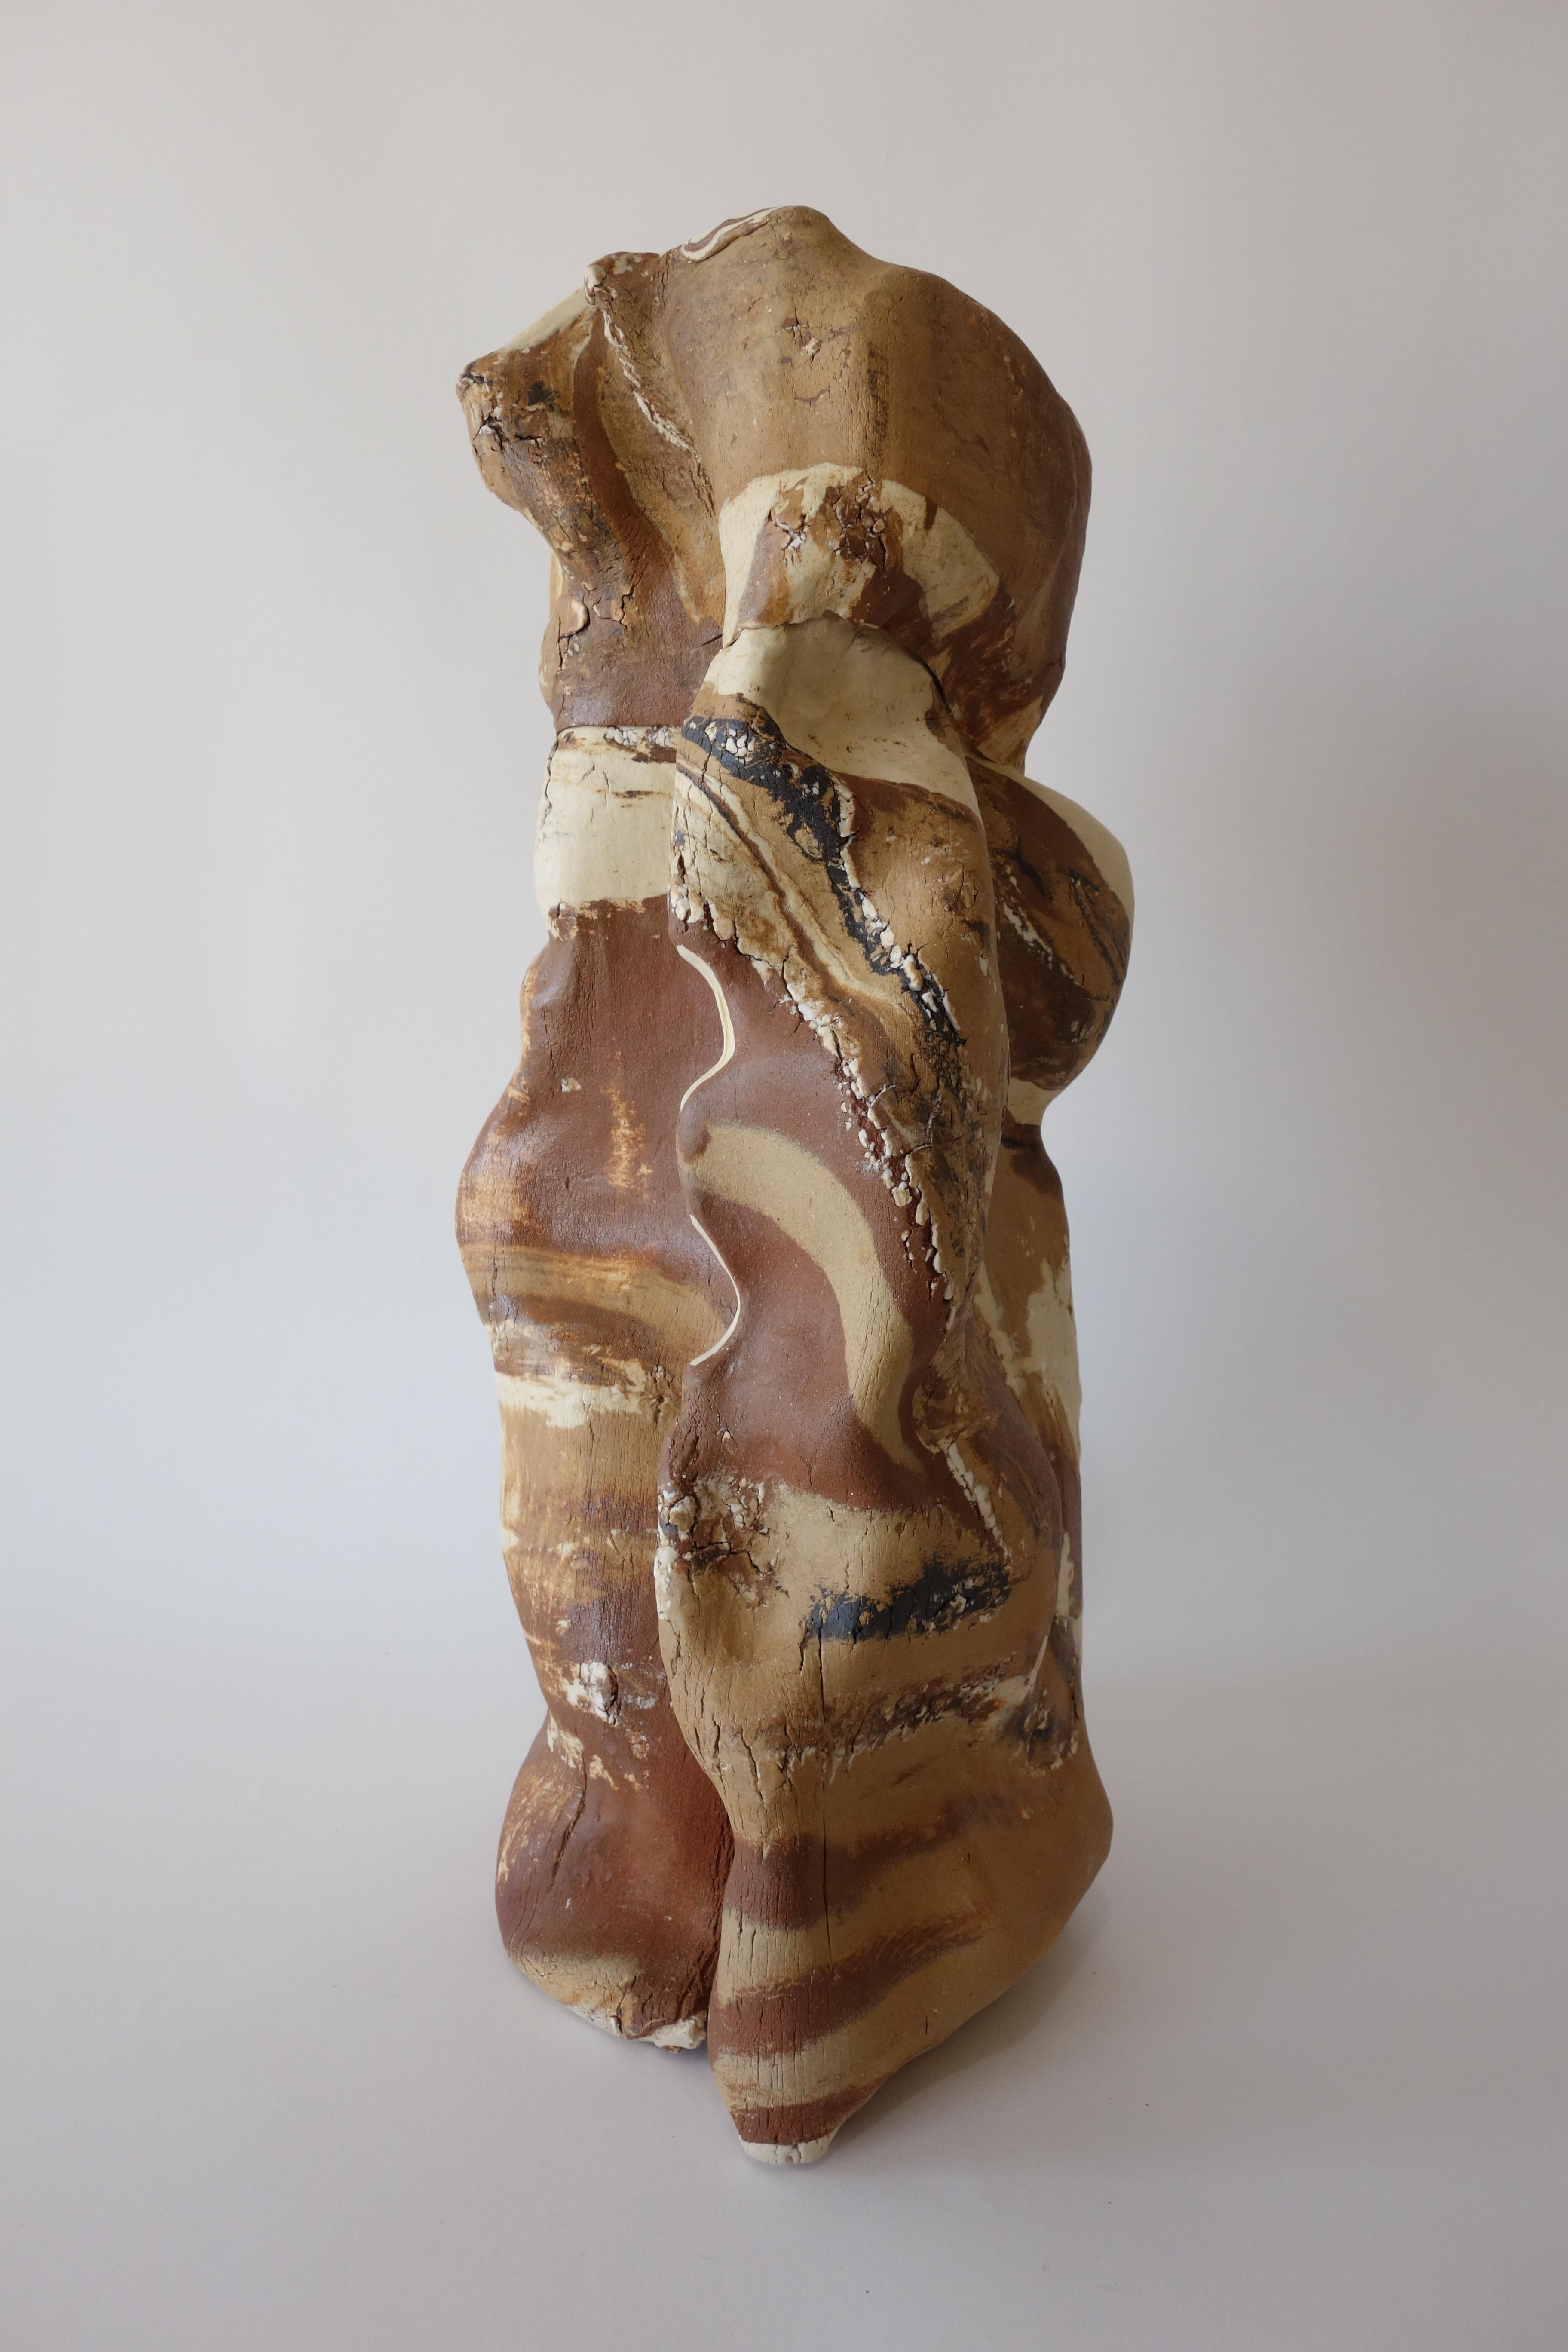 Ceramic sculpture of combined clay bodies, unique processes developed by Anna Bush Crews, looks to inherent qualities in the material, the way it smoothes, or not, the way it stretches or breaks up in actions that make the shapes and form the